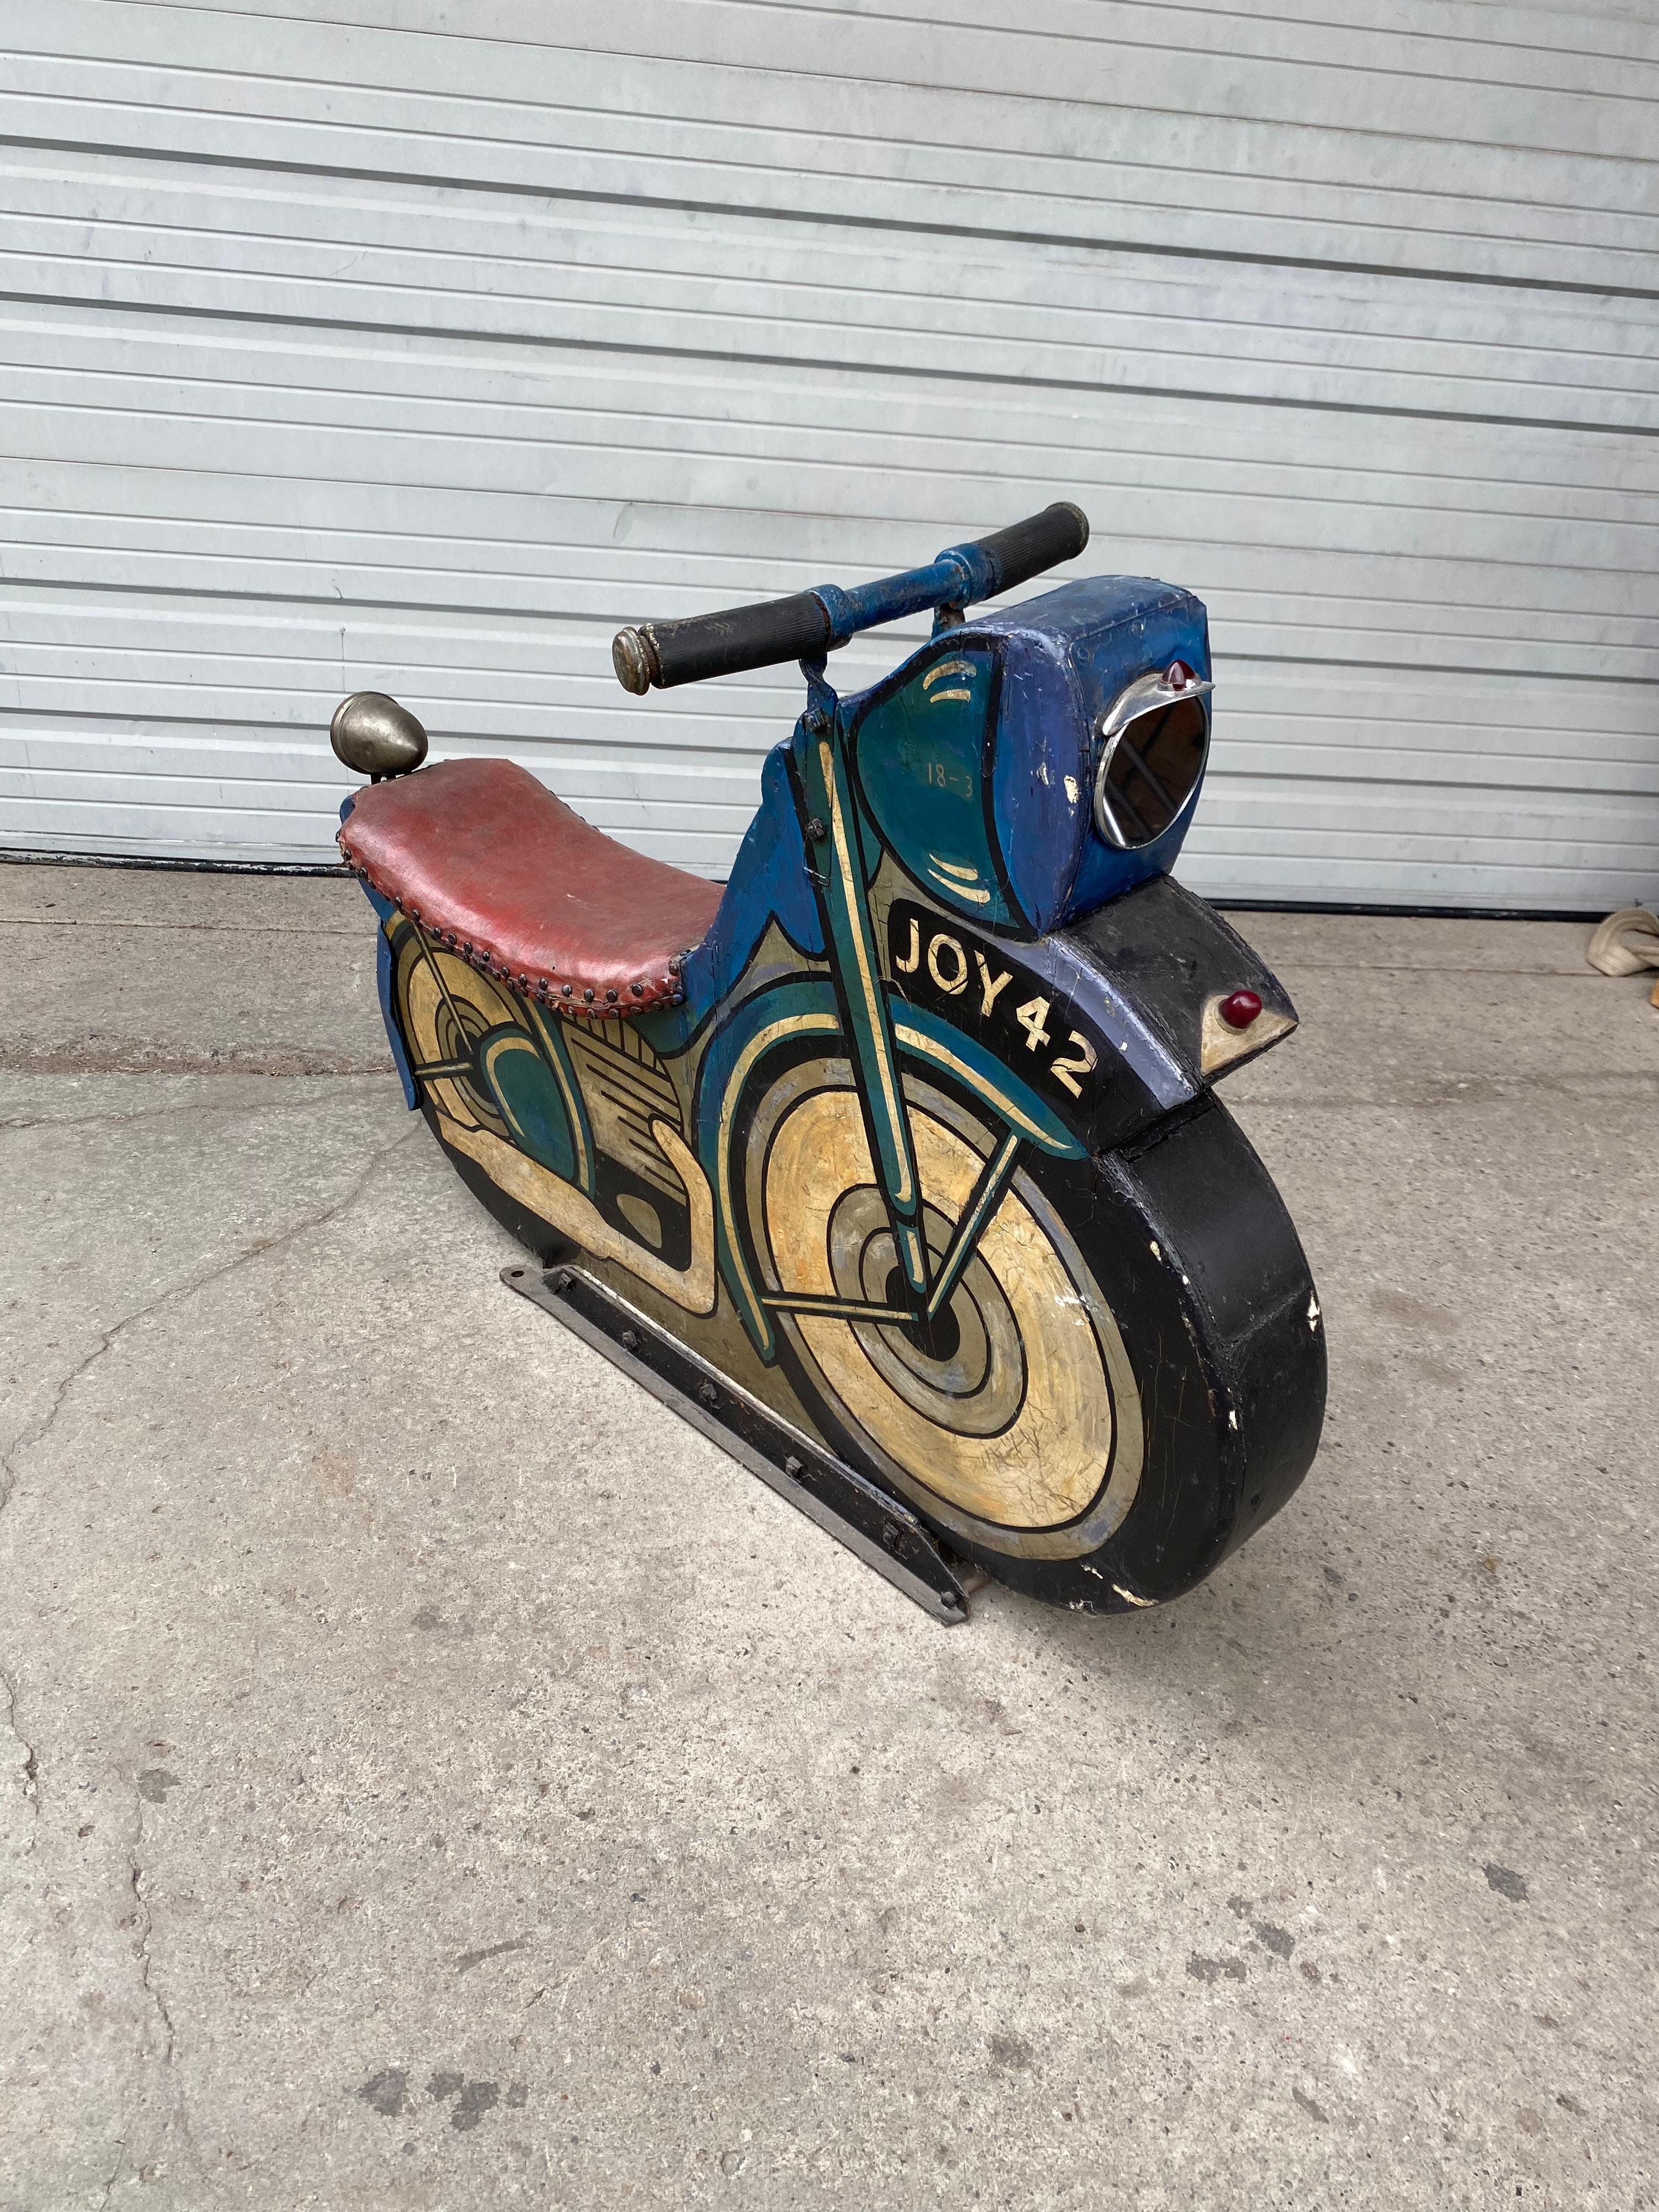 1930s Antique midway amusement park wooden motorcycle ride is one of the earliest produced for carousels and merry-go-rounds. Wonderful aged patina, two sided, original paint. Leather padded seat.metal handle bars on a cast iron base, hand delivery